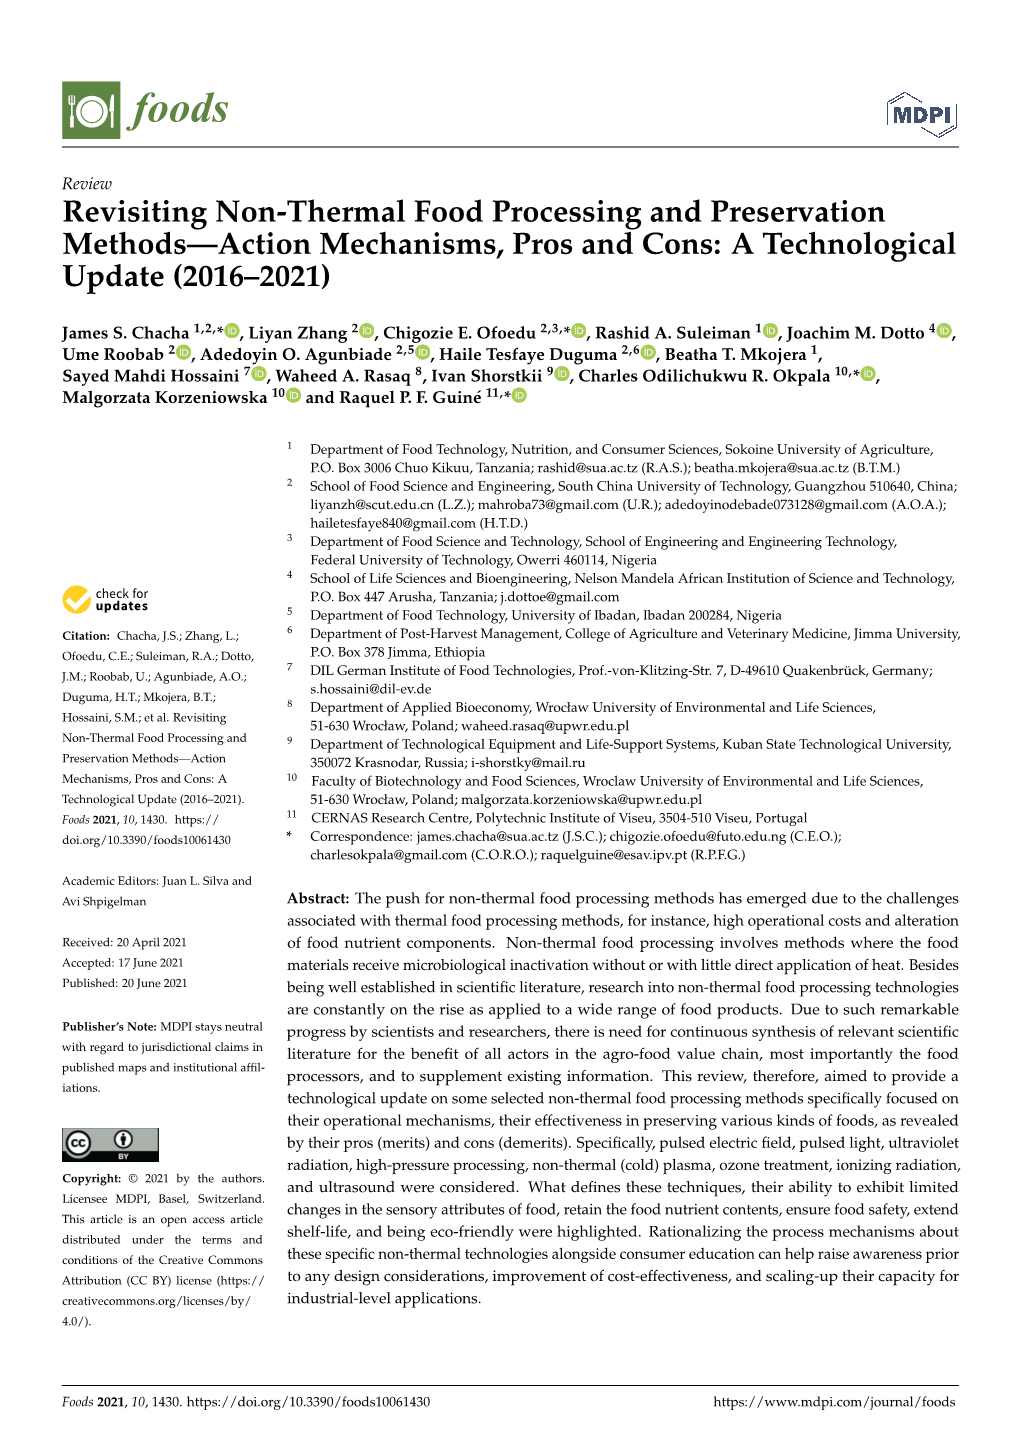 Revisiting Non-Thermal Food Processing and Preservation Methods—Action Mechanisms, Pros and Cons: a Technological Update (2016–2021)